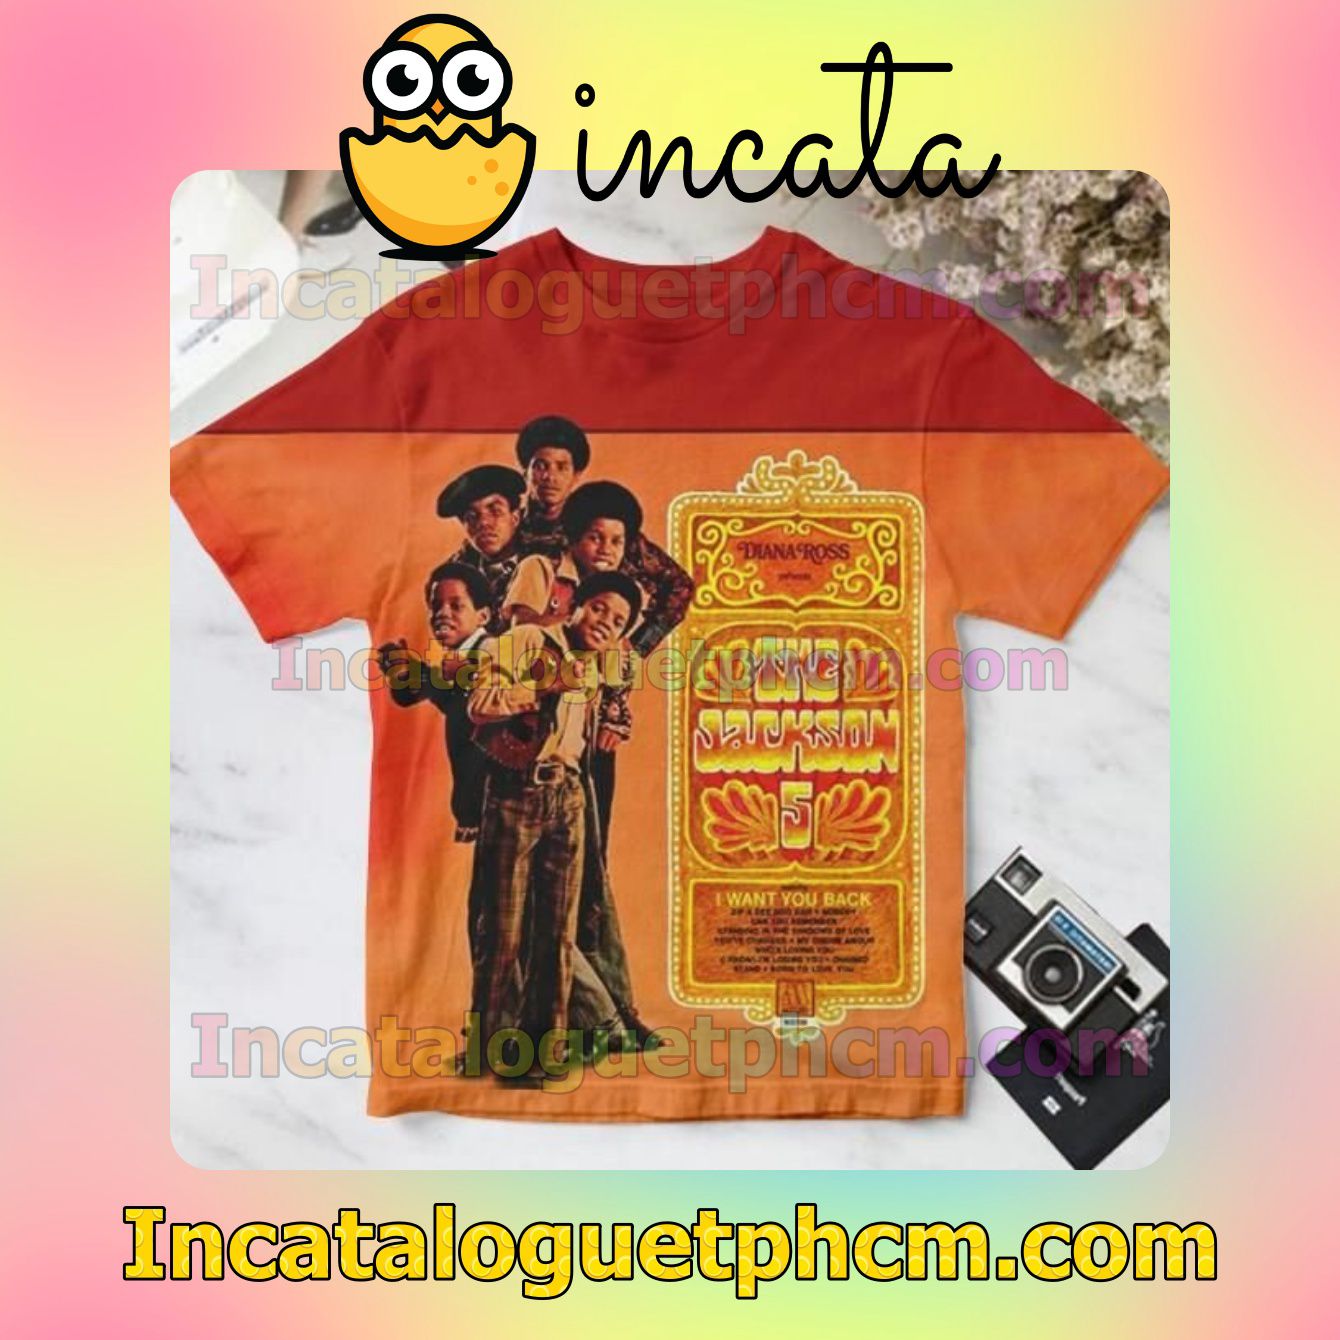 Diana Ross Presents The Jackson 5 Album Cover Mix Red And Orange For Fan Shirt